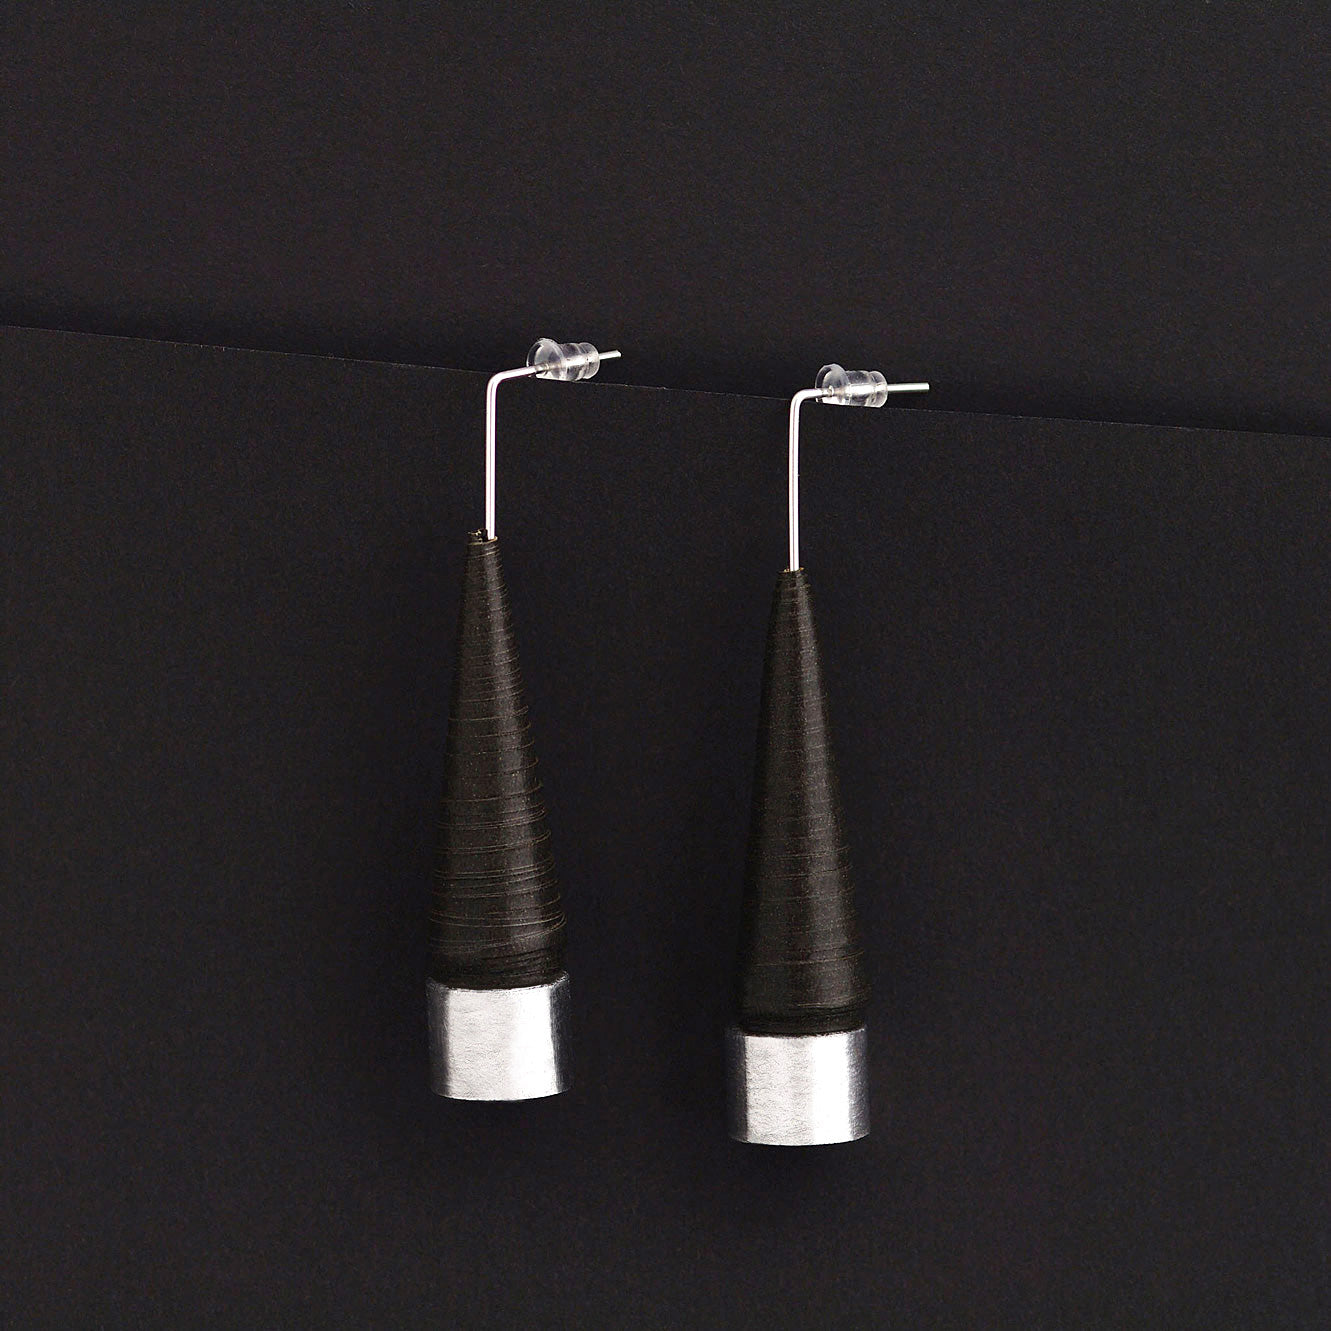 Black cone earrings with silver foil